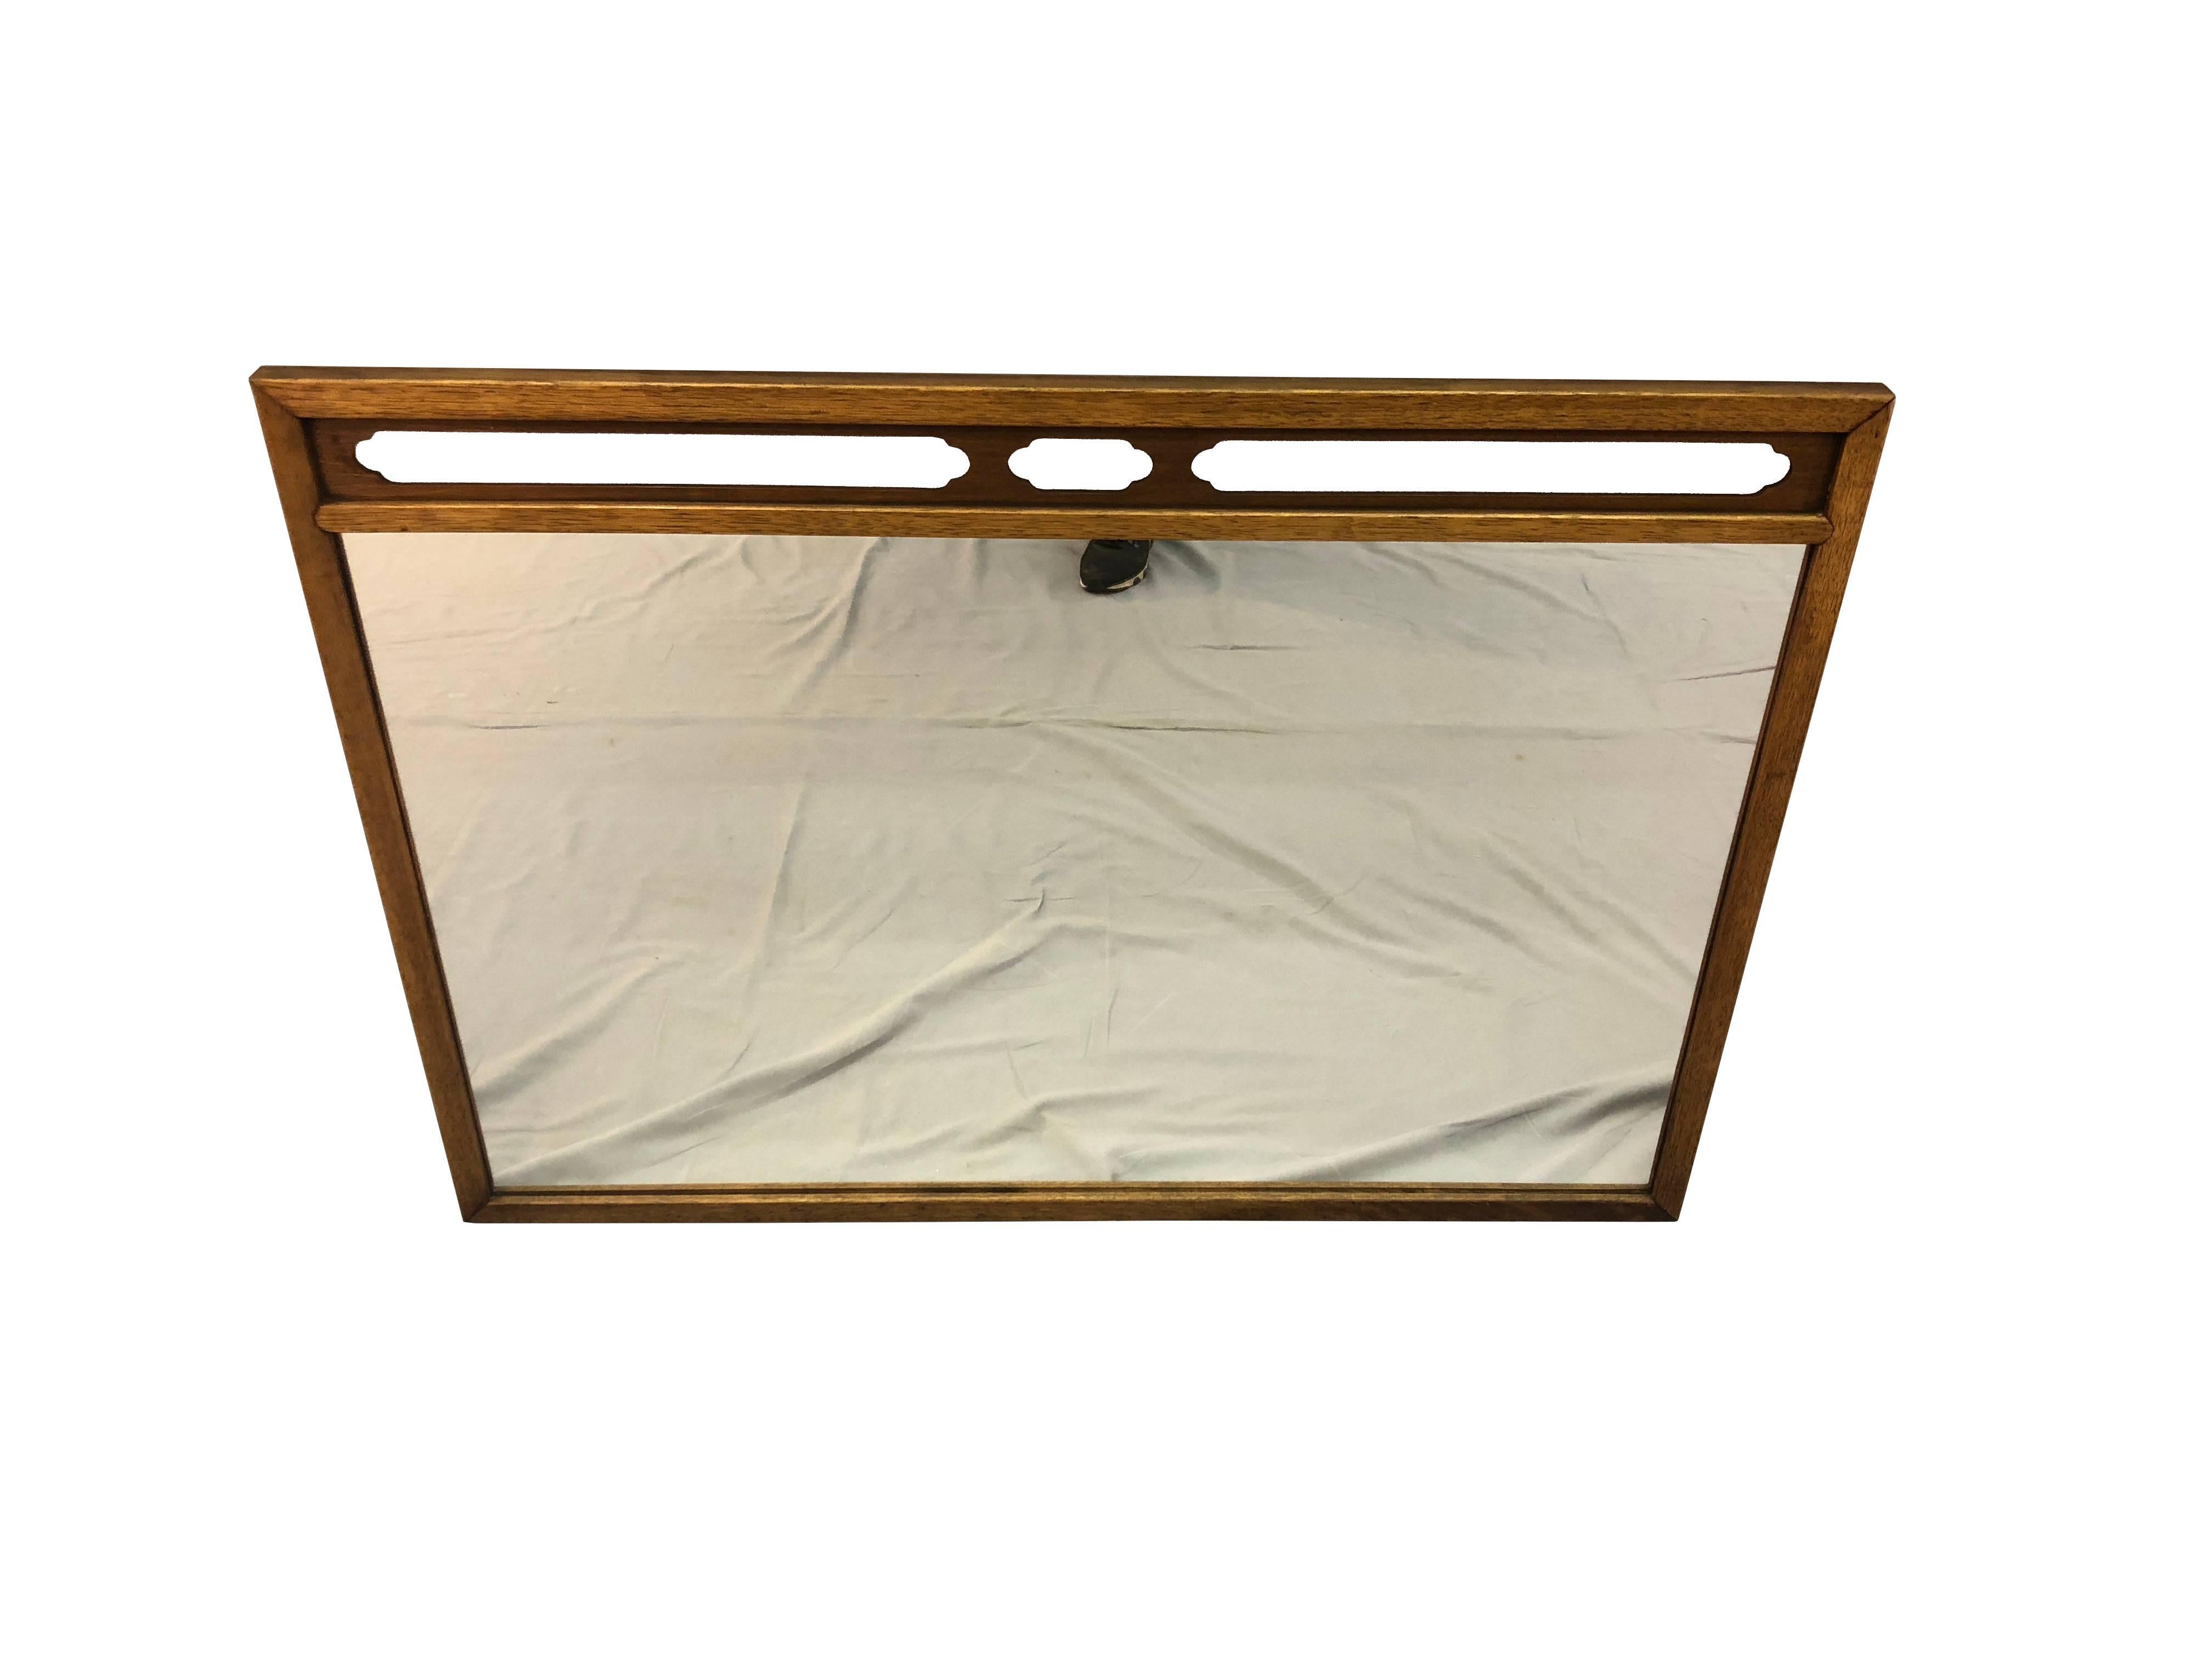 Vintage 1960s Drexel compass pecan and walnut wood wall mirror. Newly refinished condition. Some hardware included. Marked.
 